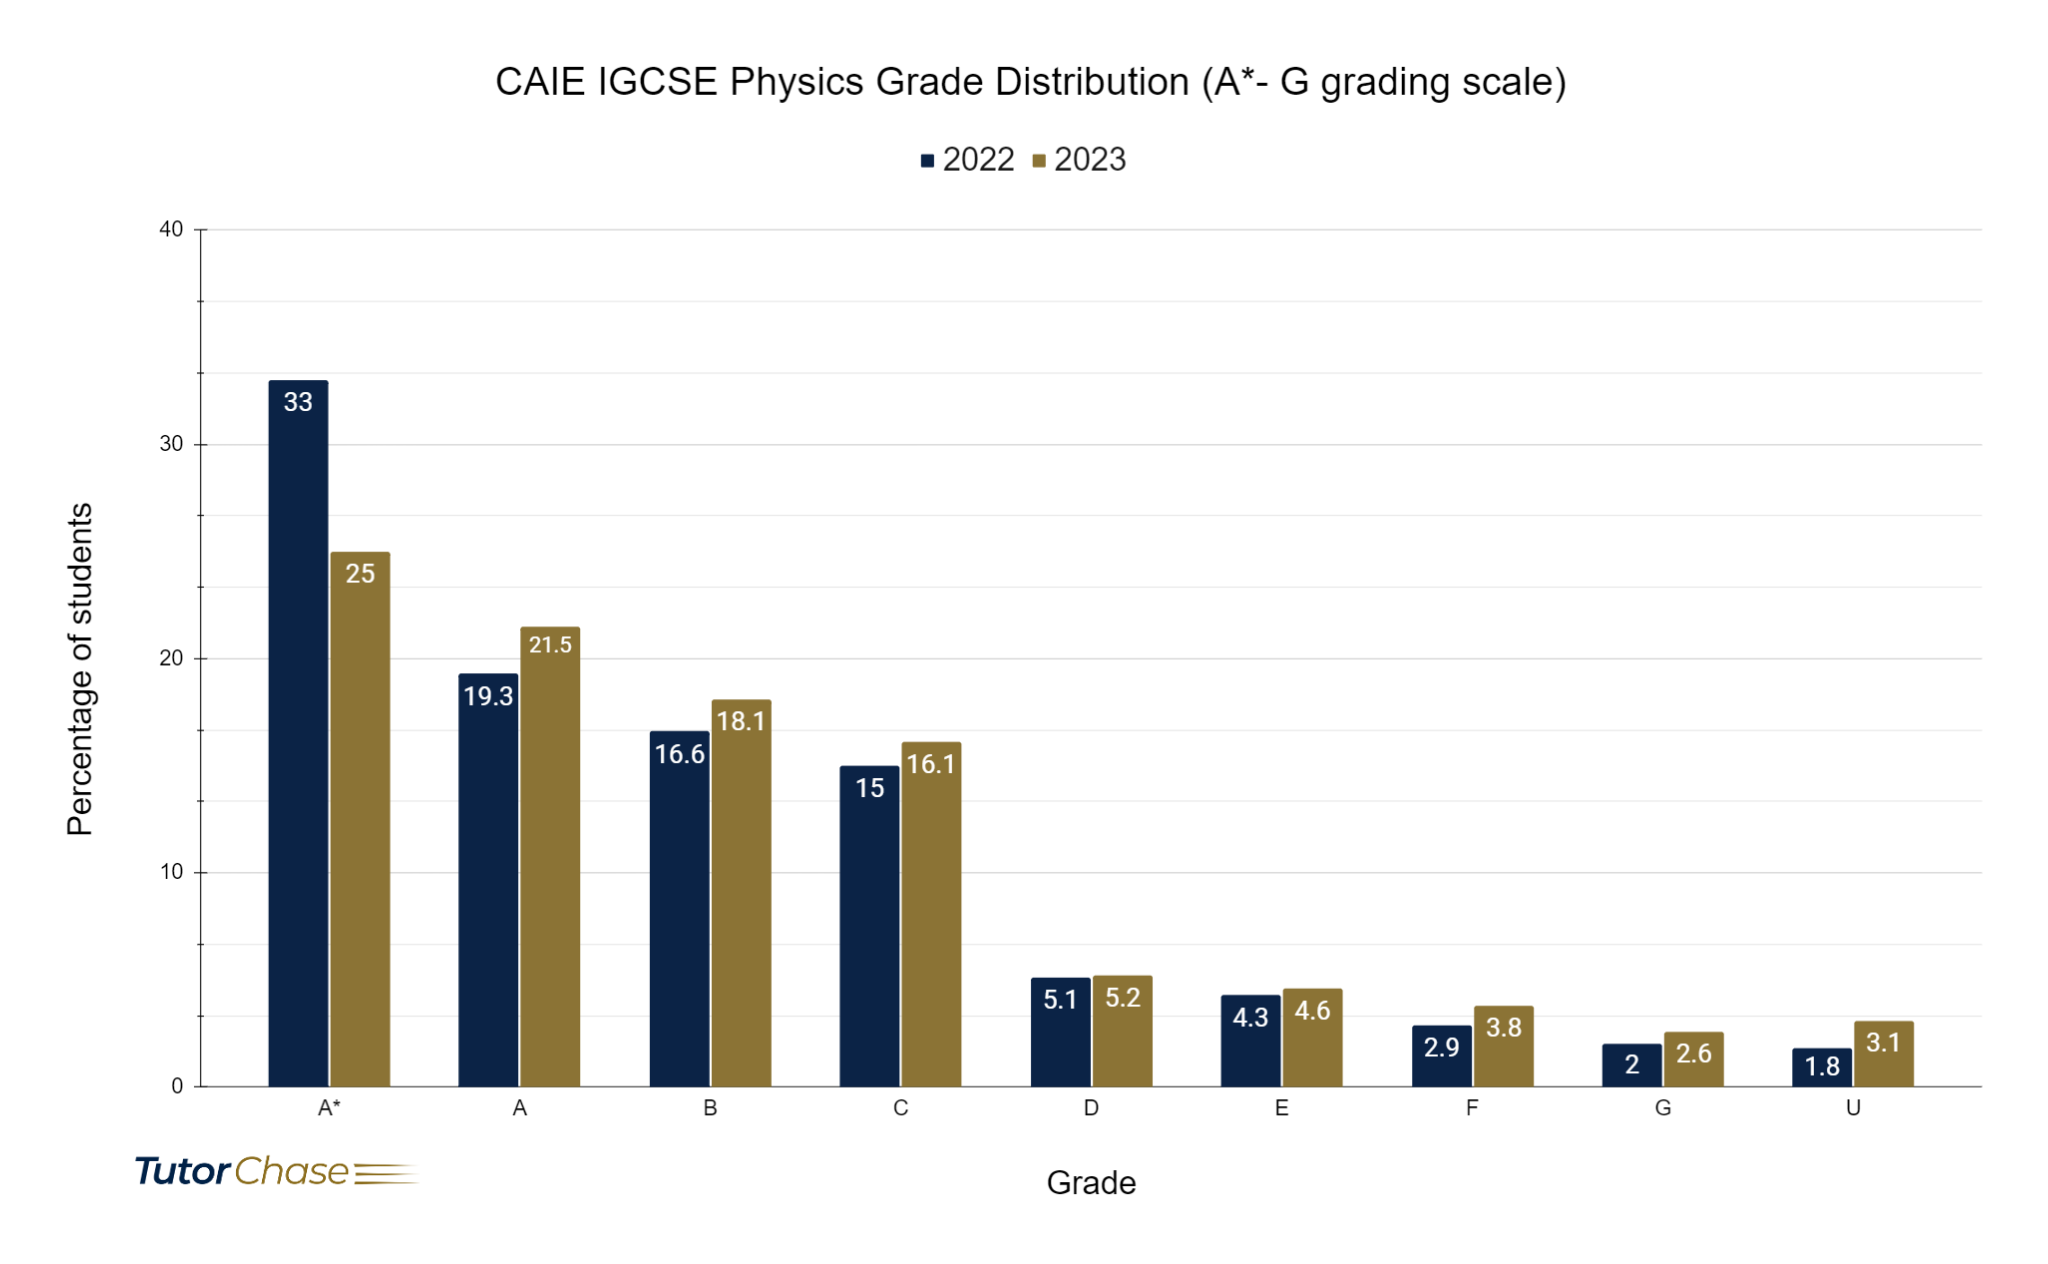 Grades distribution of CIE IGCSE Physics for 2022 and 2023